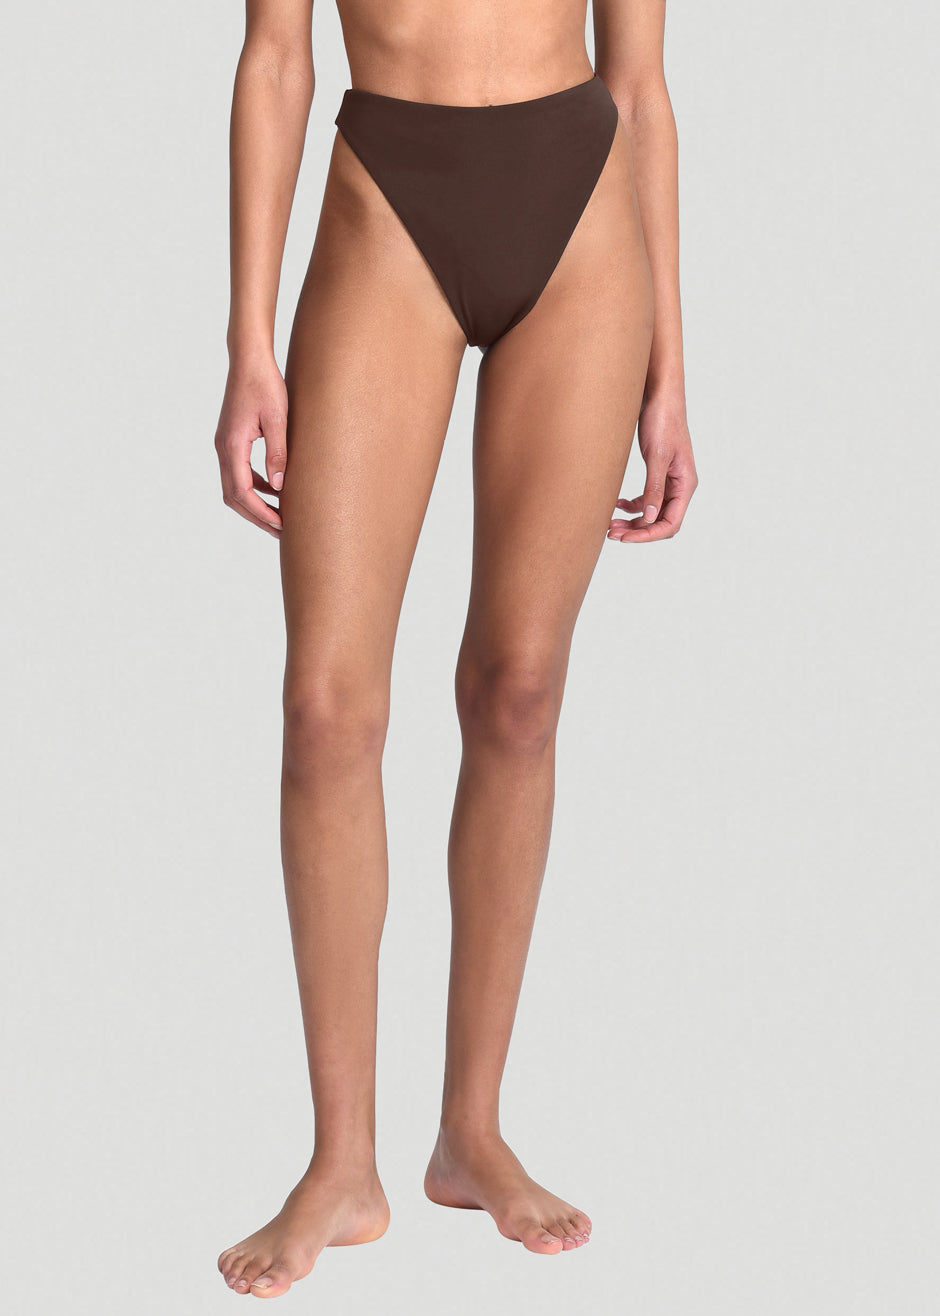 Aexae Triangle High Cut Swimsuit Bottoms - Brown - 2